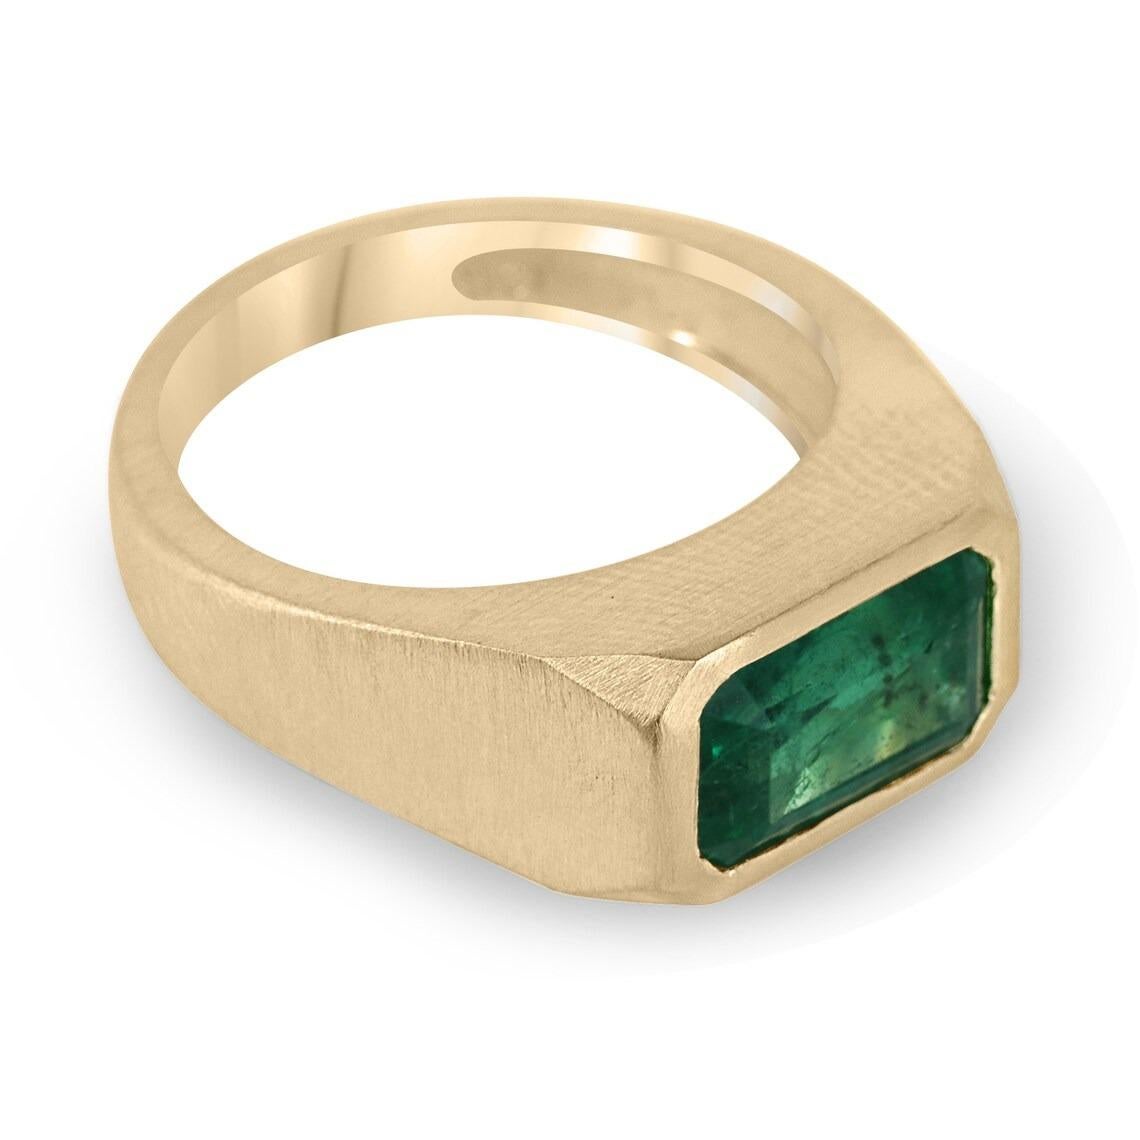 This stunning natural emerald ring features an elongated emerald cut emerald set east to west, creating a modern and sophisticated look. The emerald's rich green color and natural inclusions are on full display, making for a truly unique piece. The